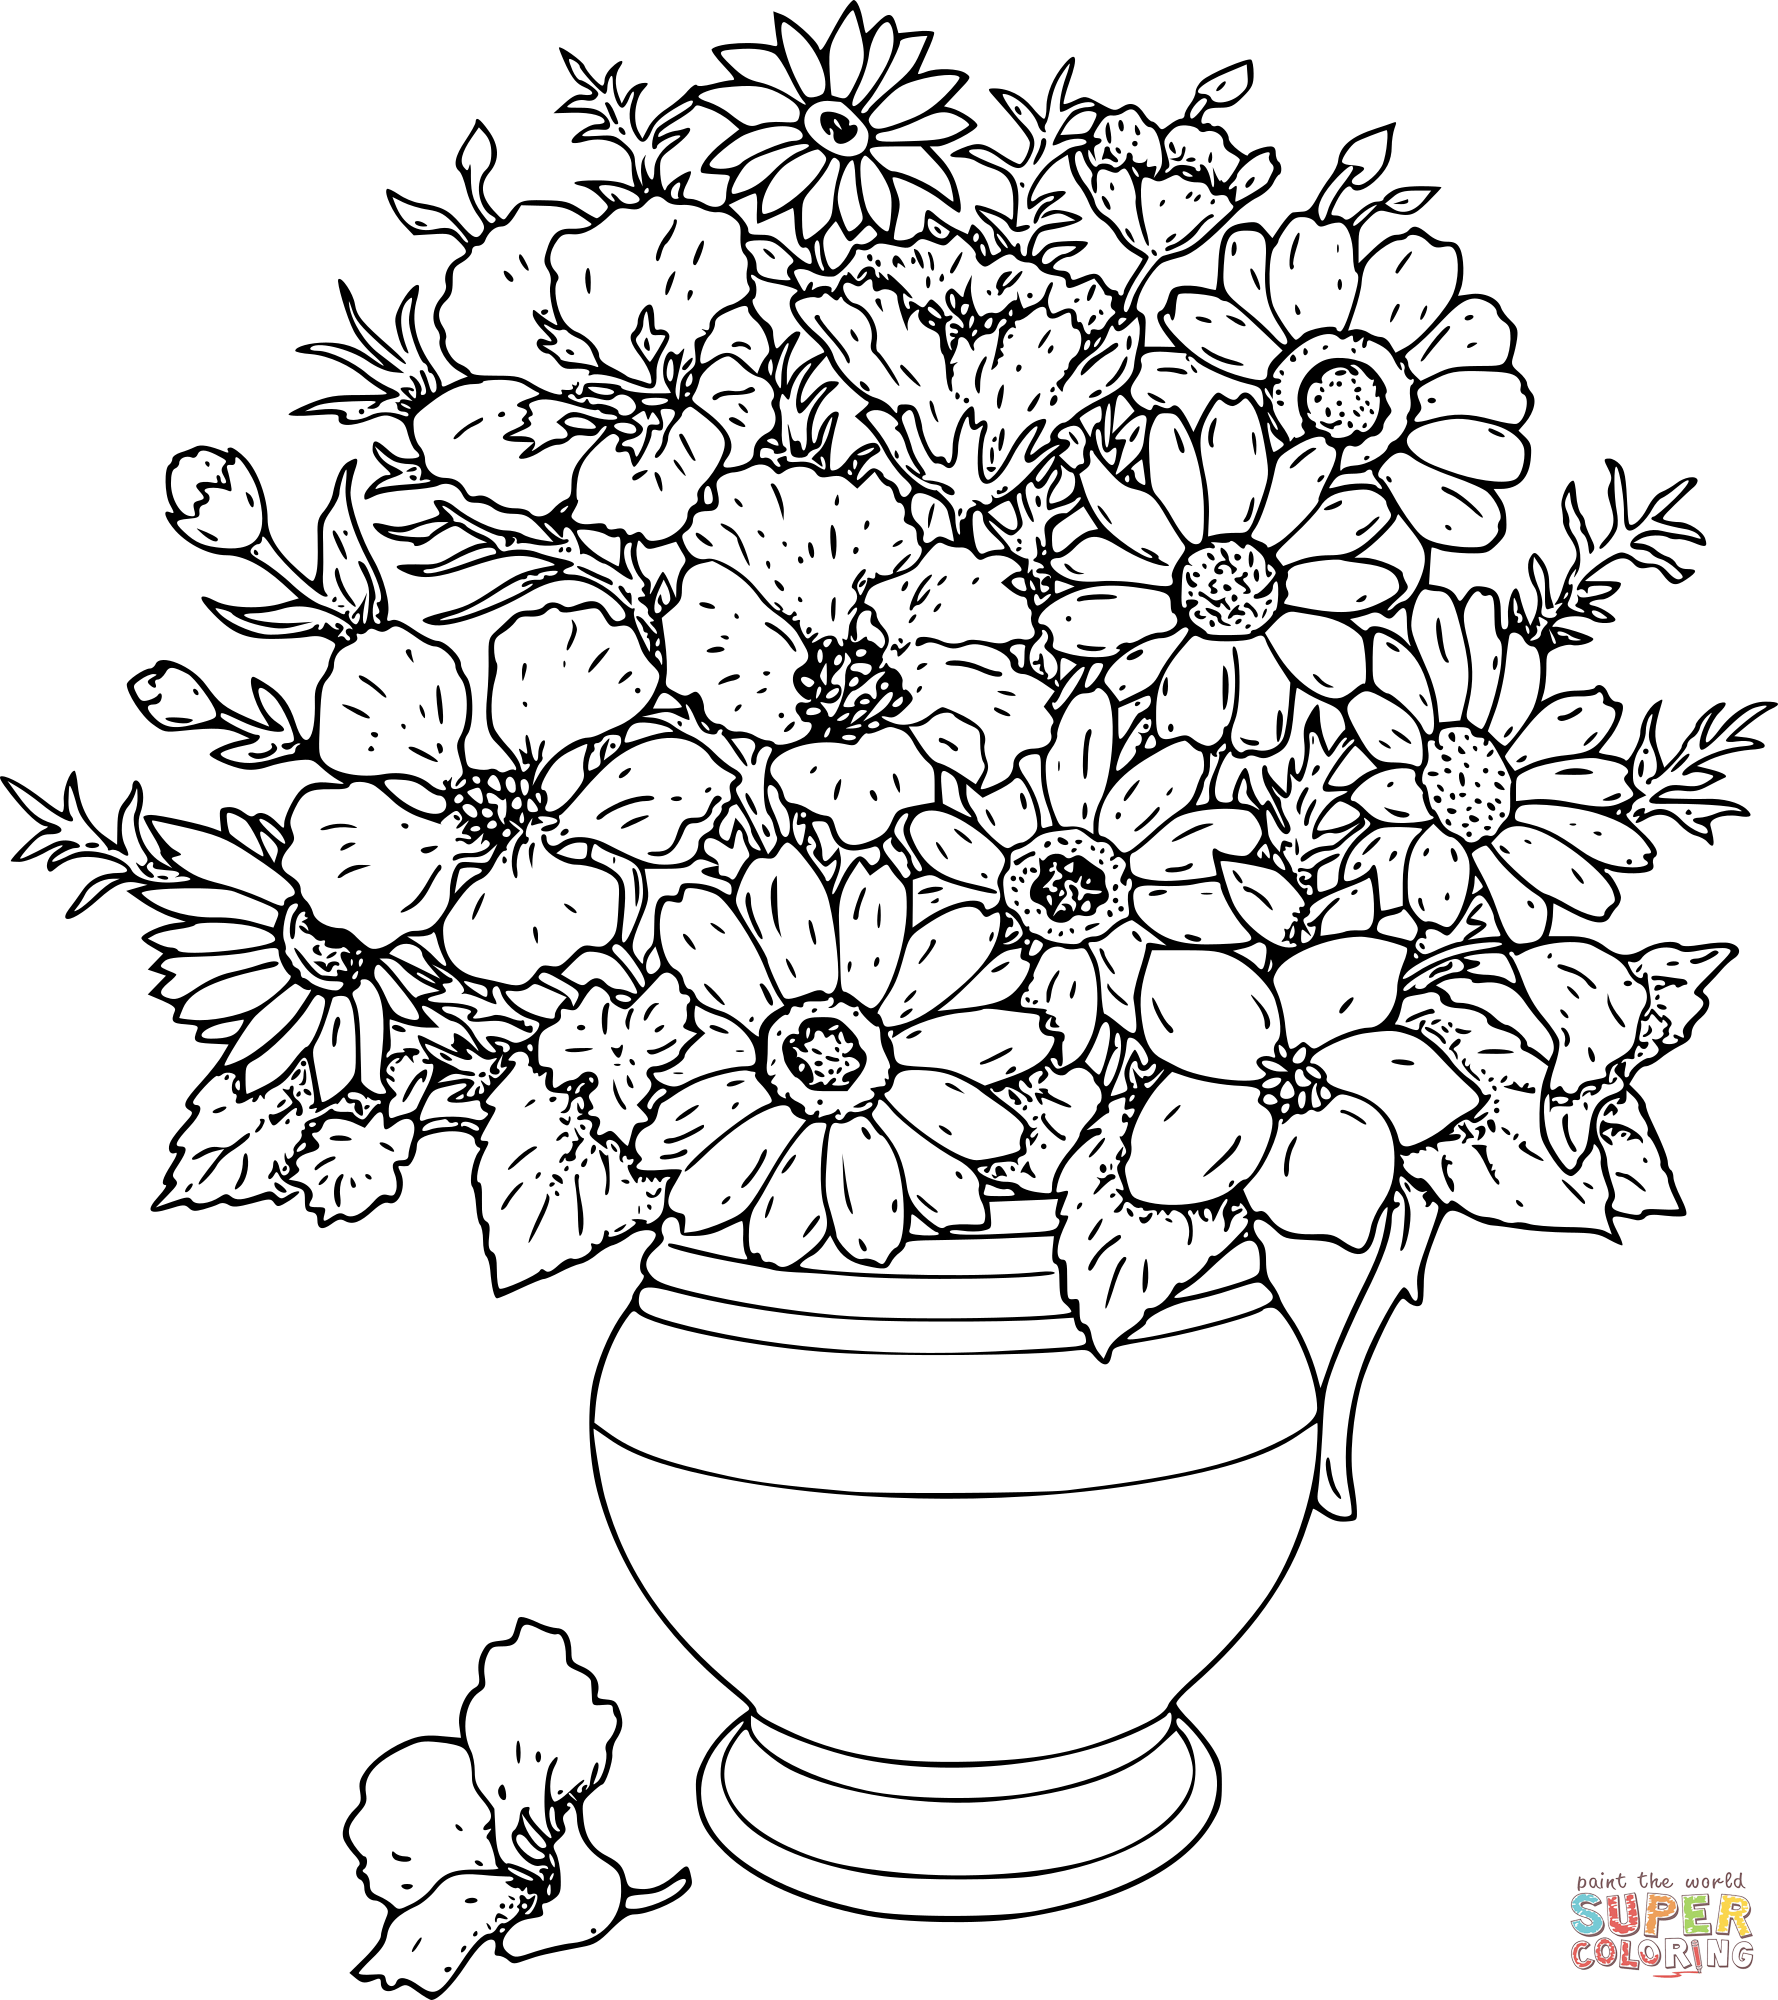 Potted Flowers coloring page | Free Printable Coloring Pages